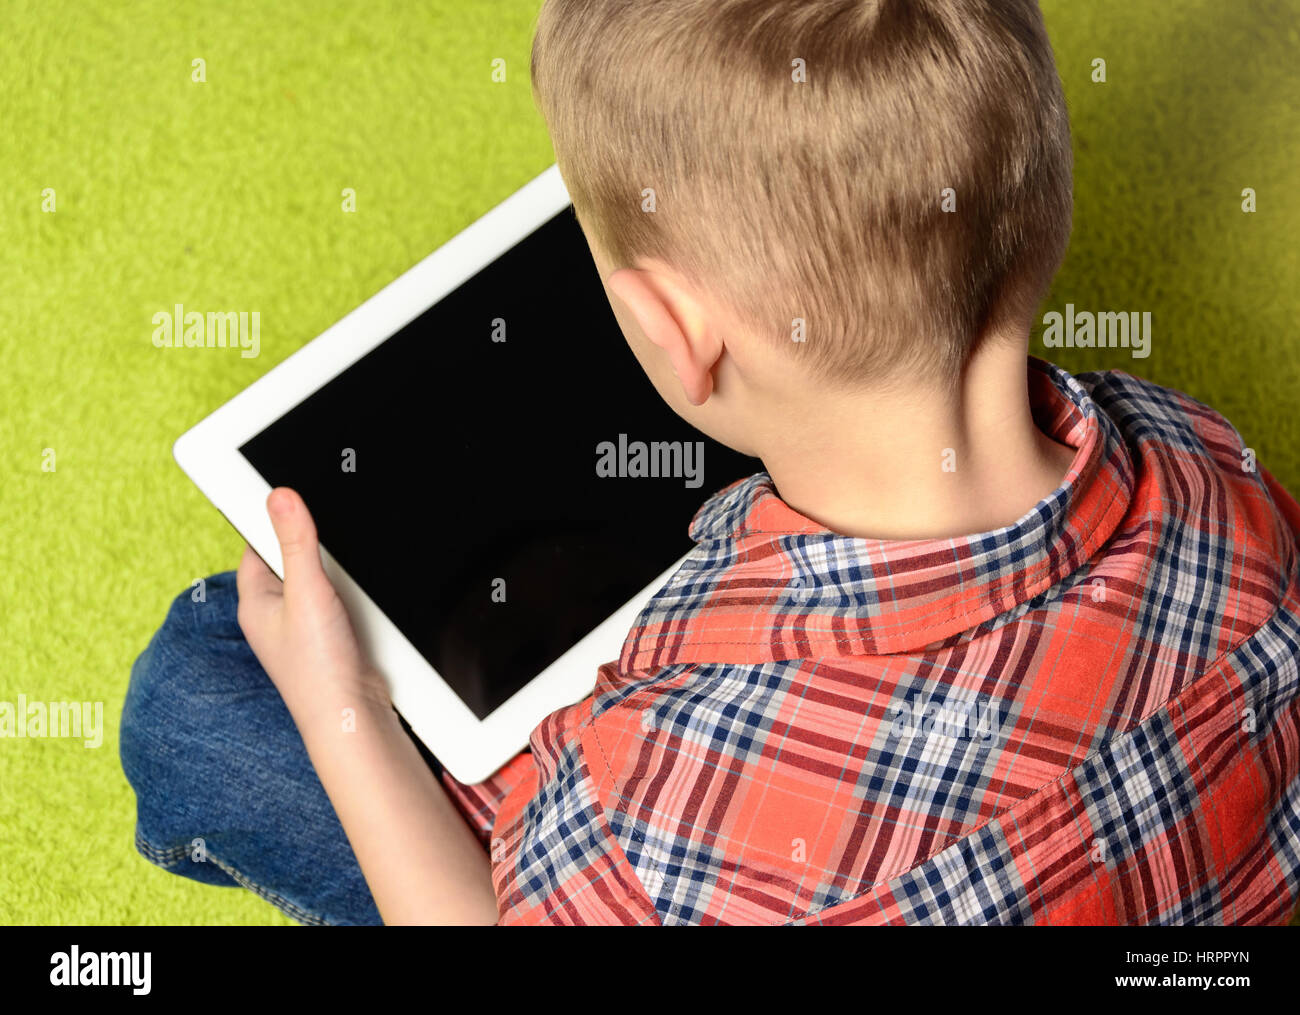 child keeps tablet in hands Stock Photo